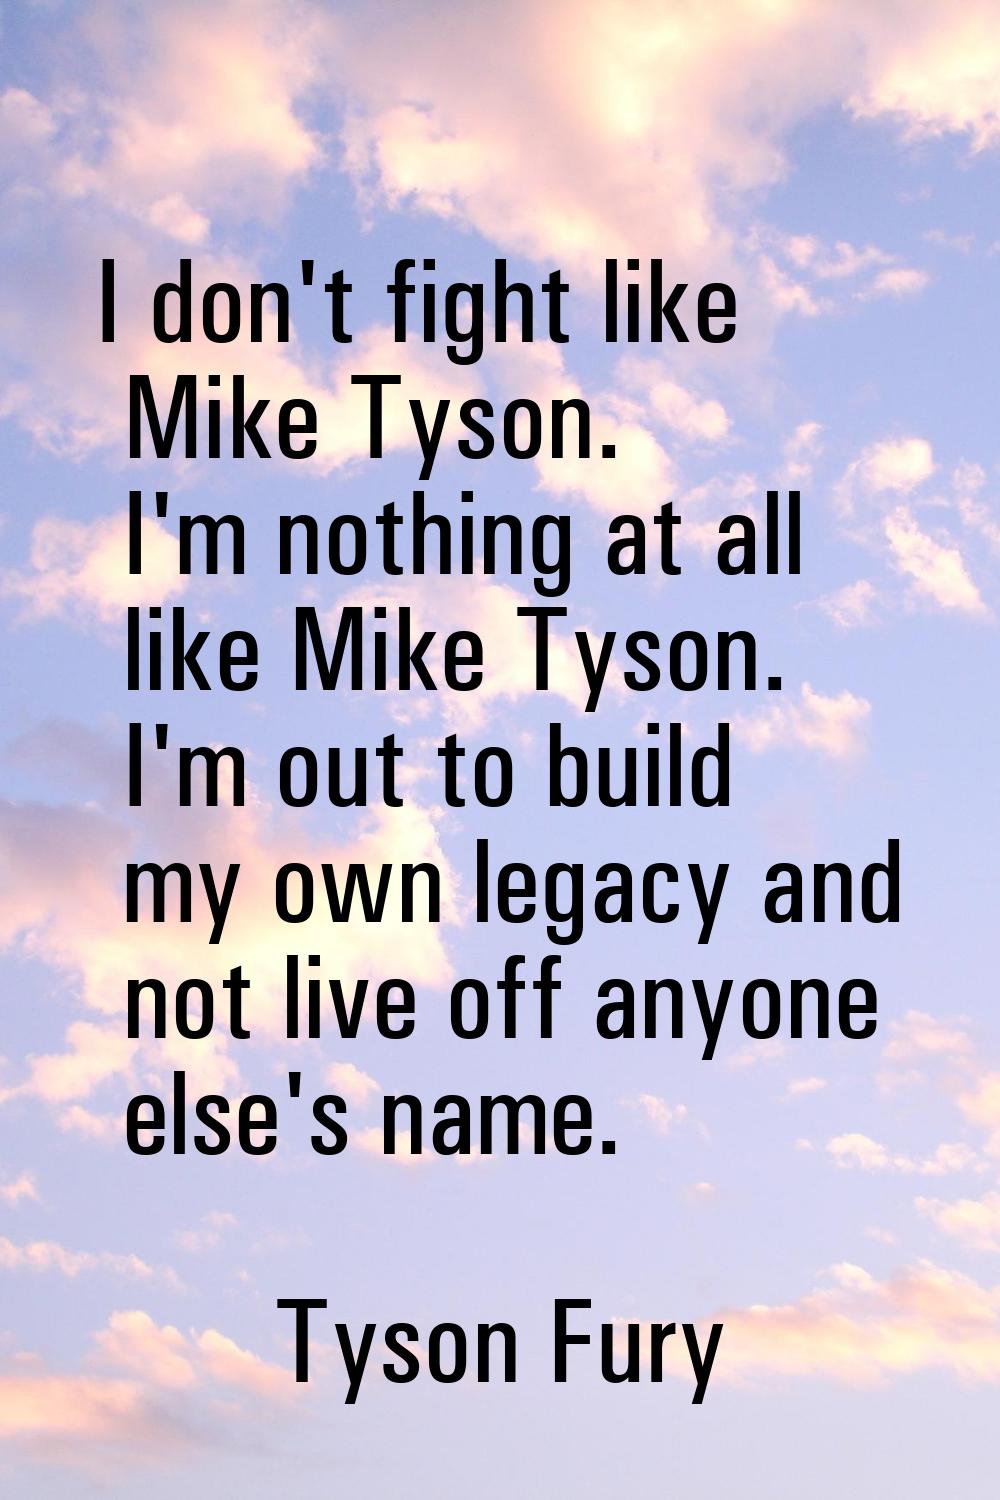 I don't fight like Mike Tyson. I'm nothing at all like Mike Tyson. I'm out to build my own legacy a